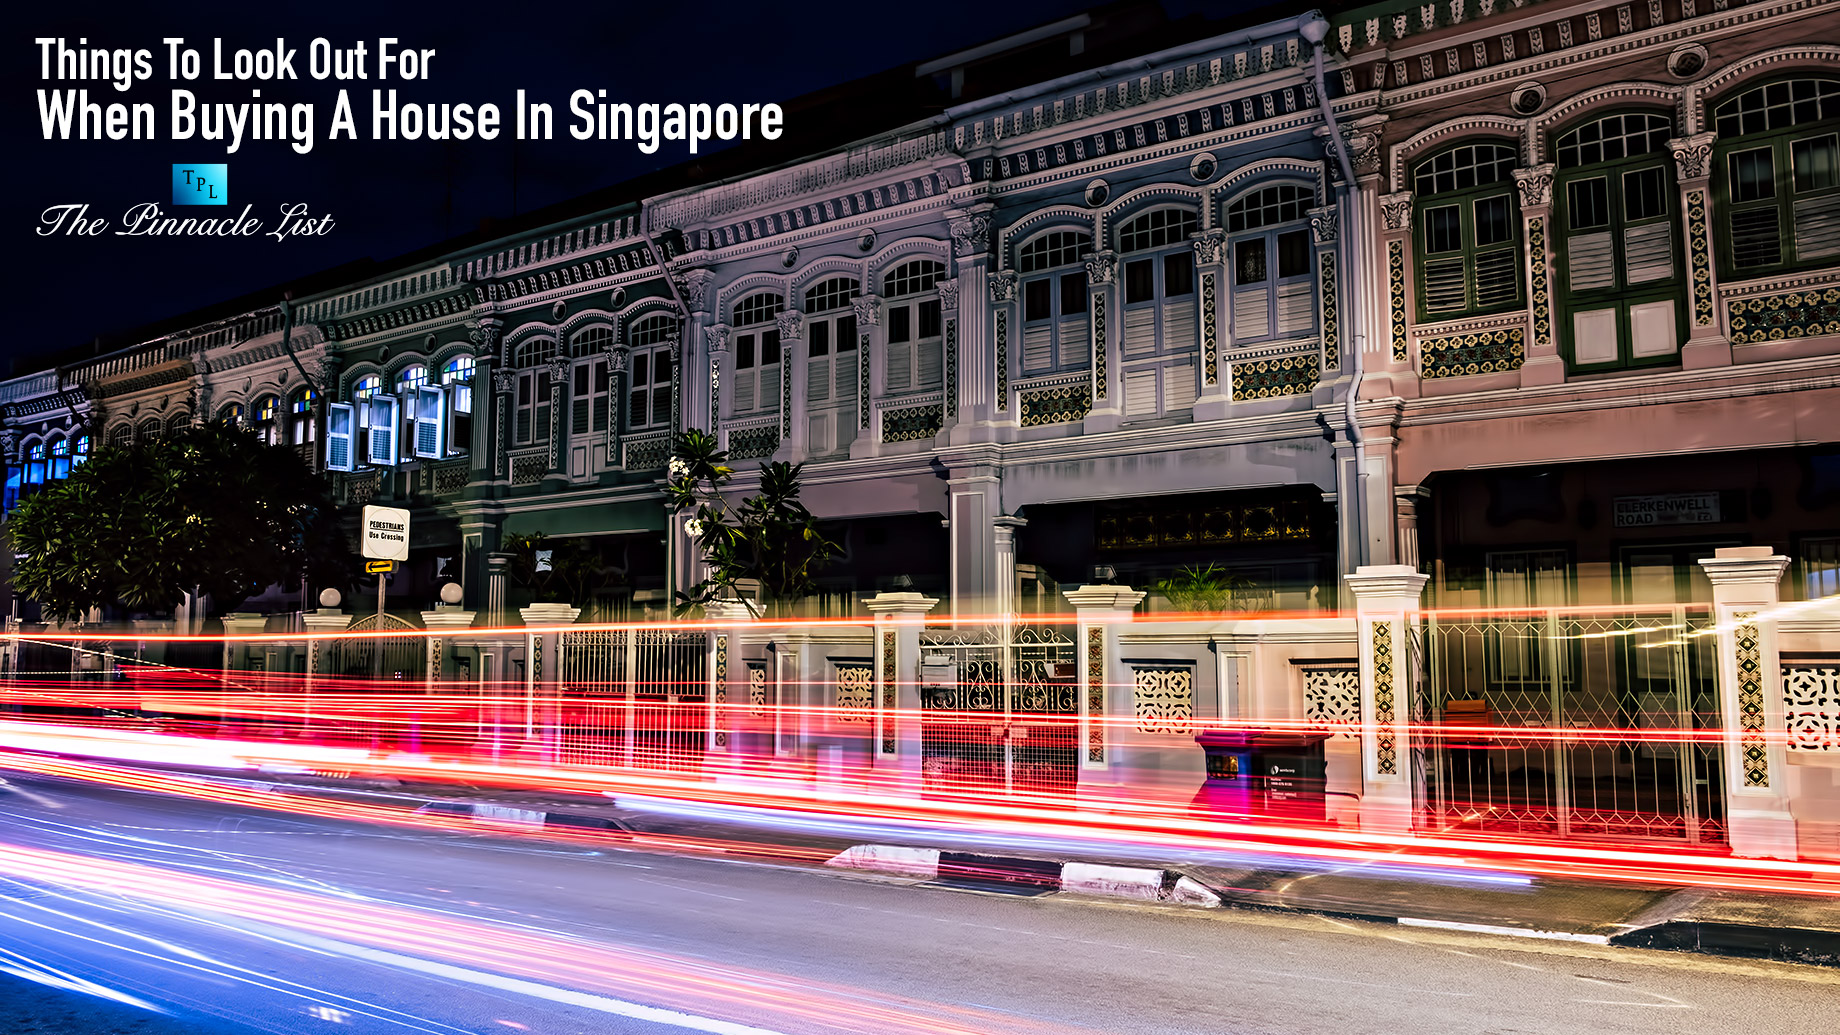 Things To Look Out For When Buying A House In Singapore